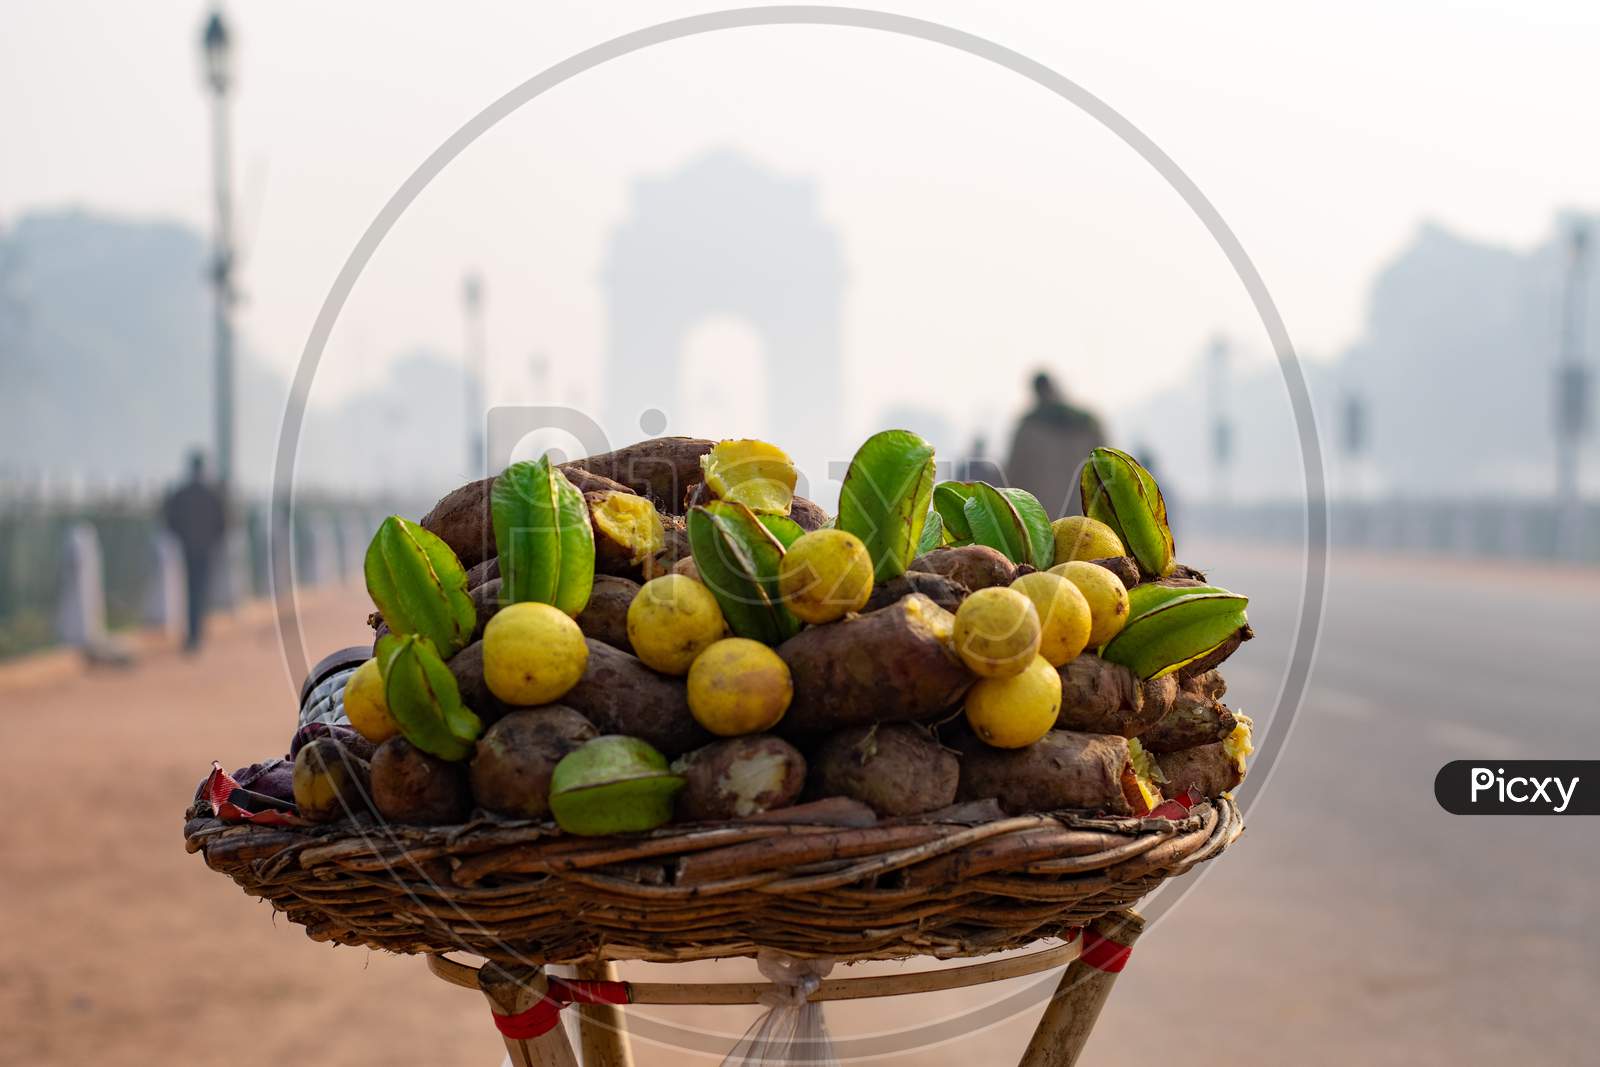 Sweet potatoes and star fruits in front of India Gate in Delhi